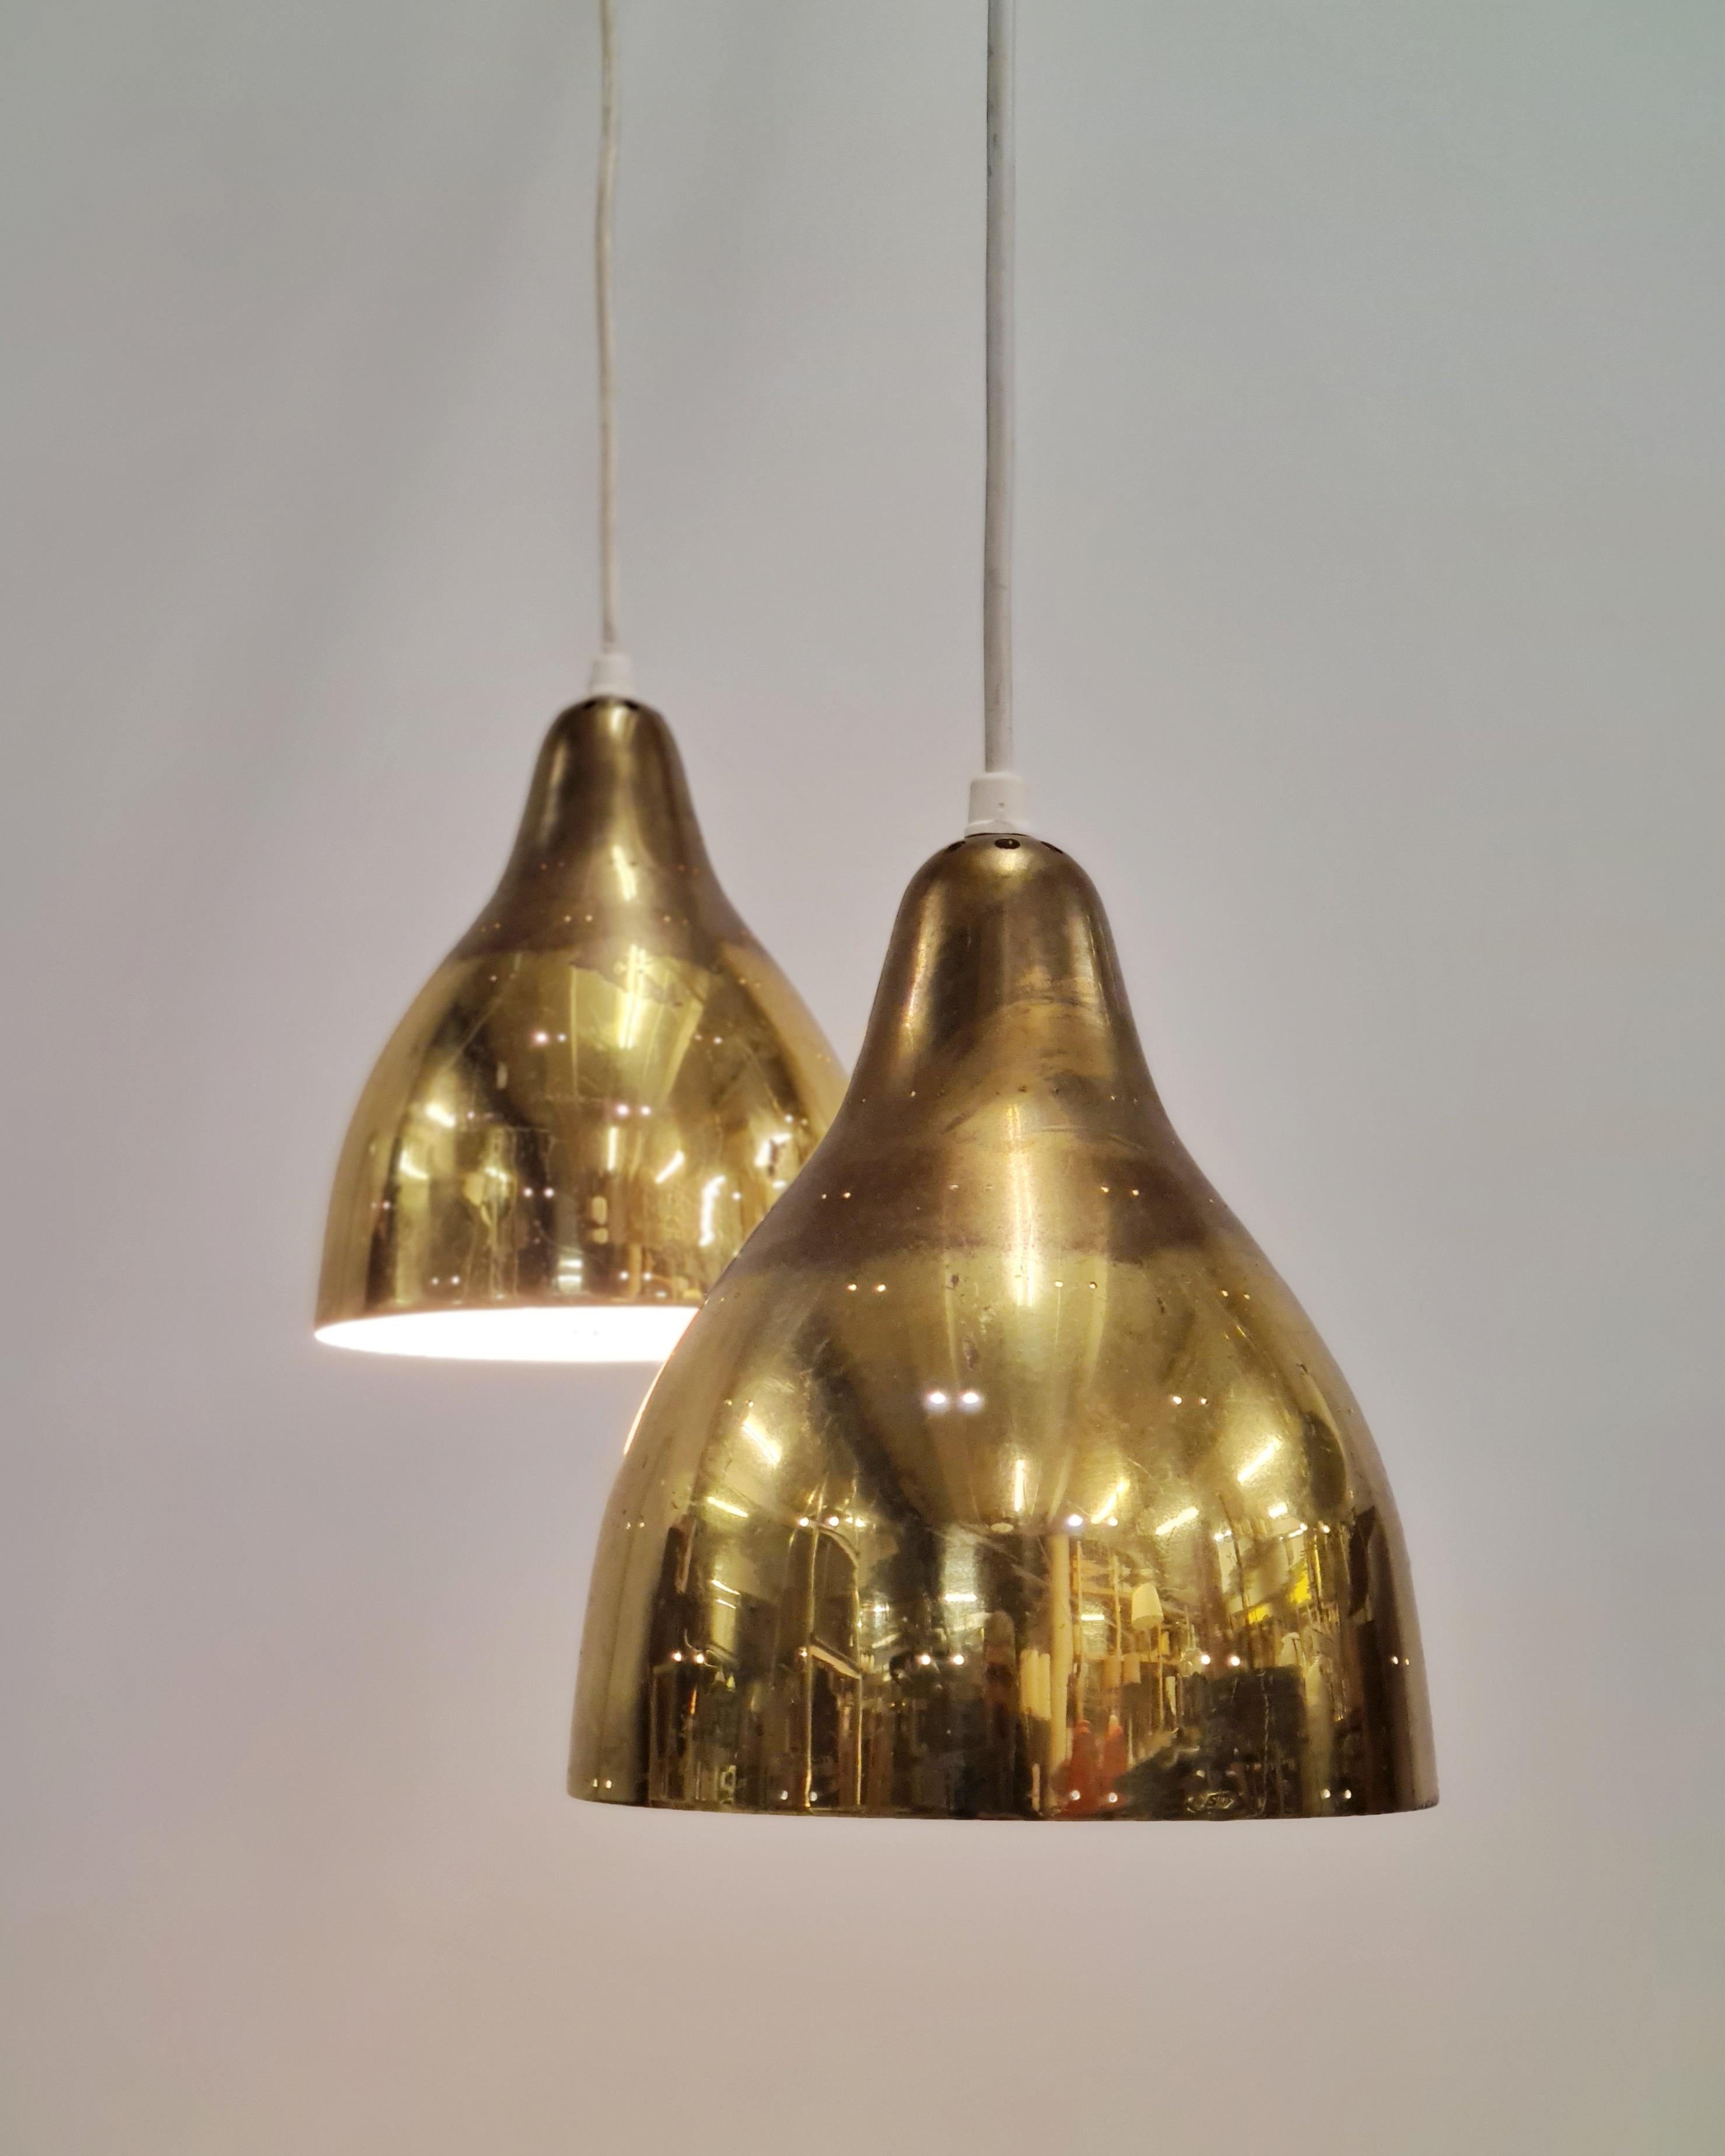 A beautiful pair of ceiling pendant lamps in full brass, made by Itsu in Finland in the 1950s. Model ER 84. 

The bell shaped brass shades are perforated with a two-dot pattern, are very beautiful and with their original patina. The lamps are small